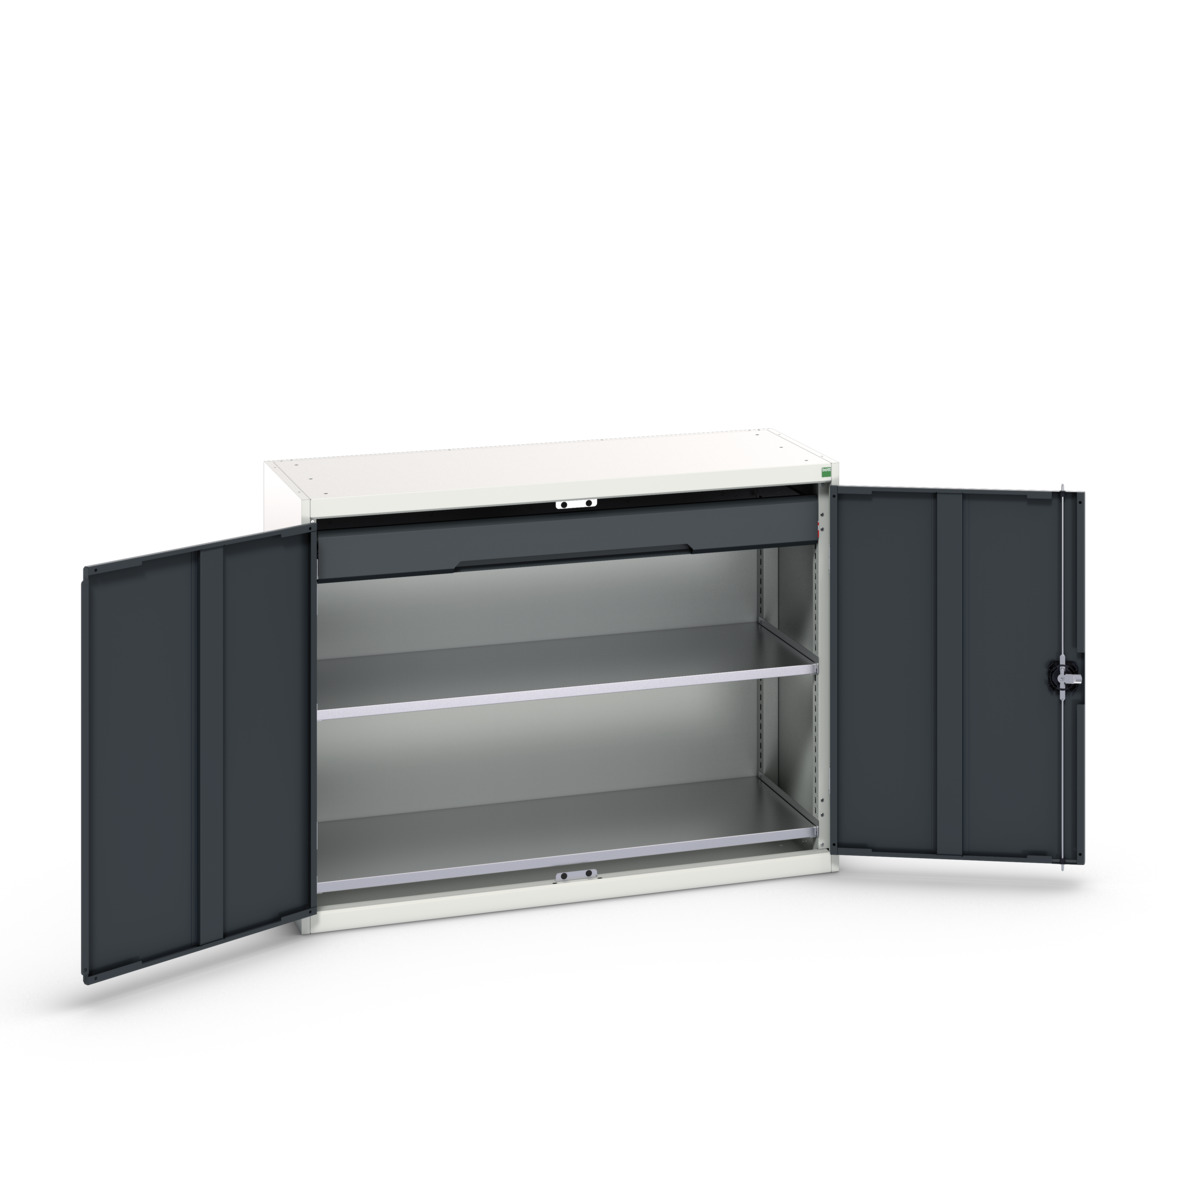 16926604.19 - verso kitted cupboard